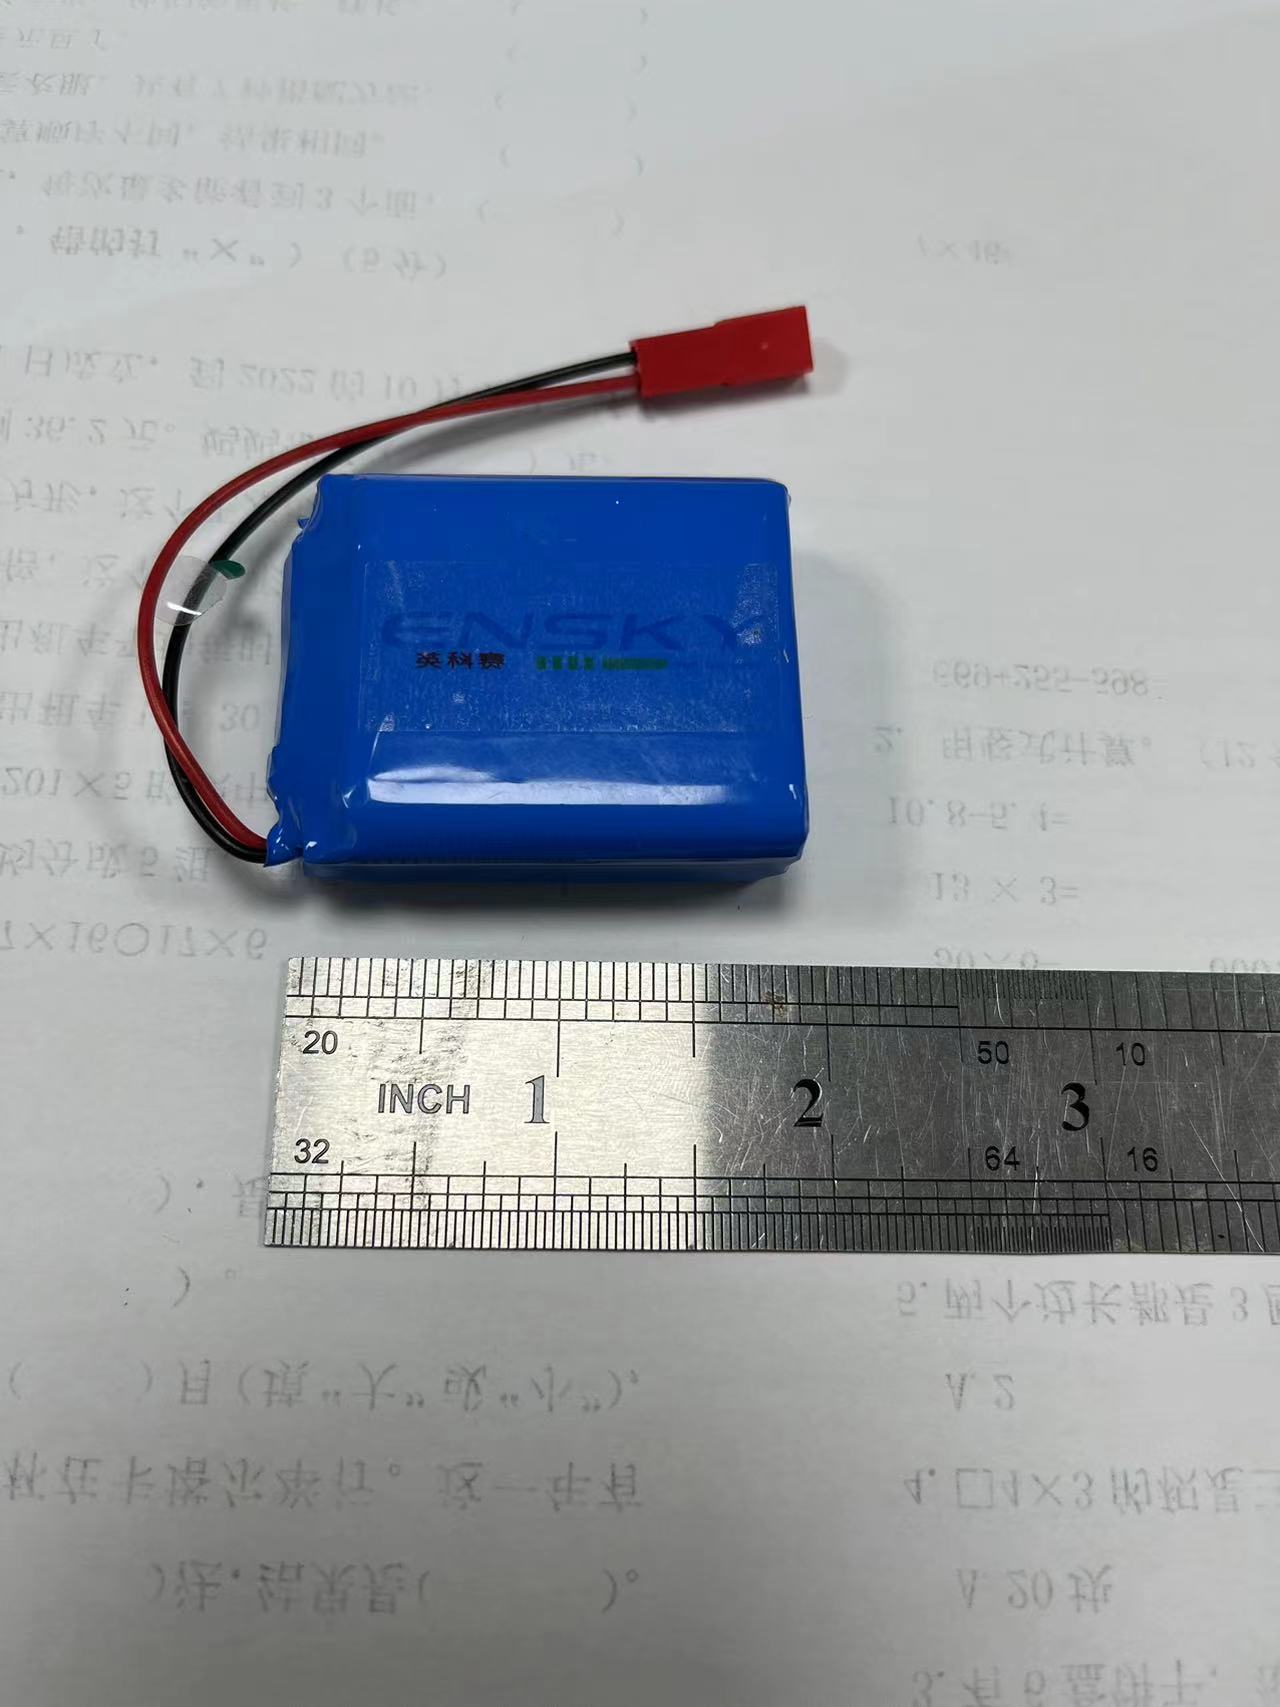 High-definition 4K Lianyong module with large capacity original polymer lithium battery of 4000mA FOR X1, X7 ,X9